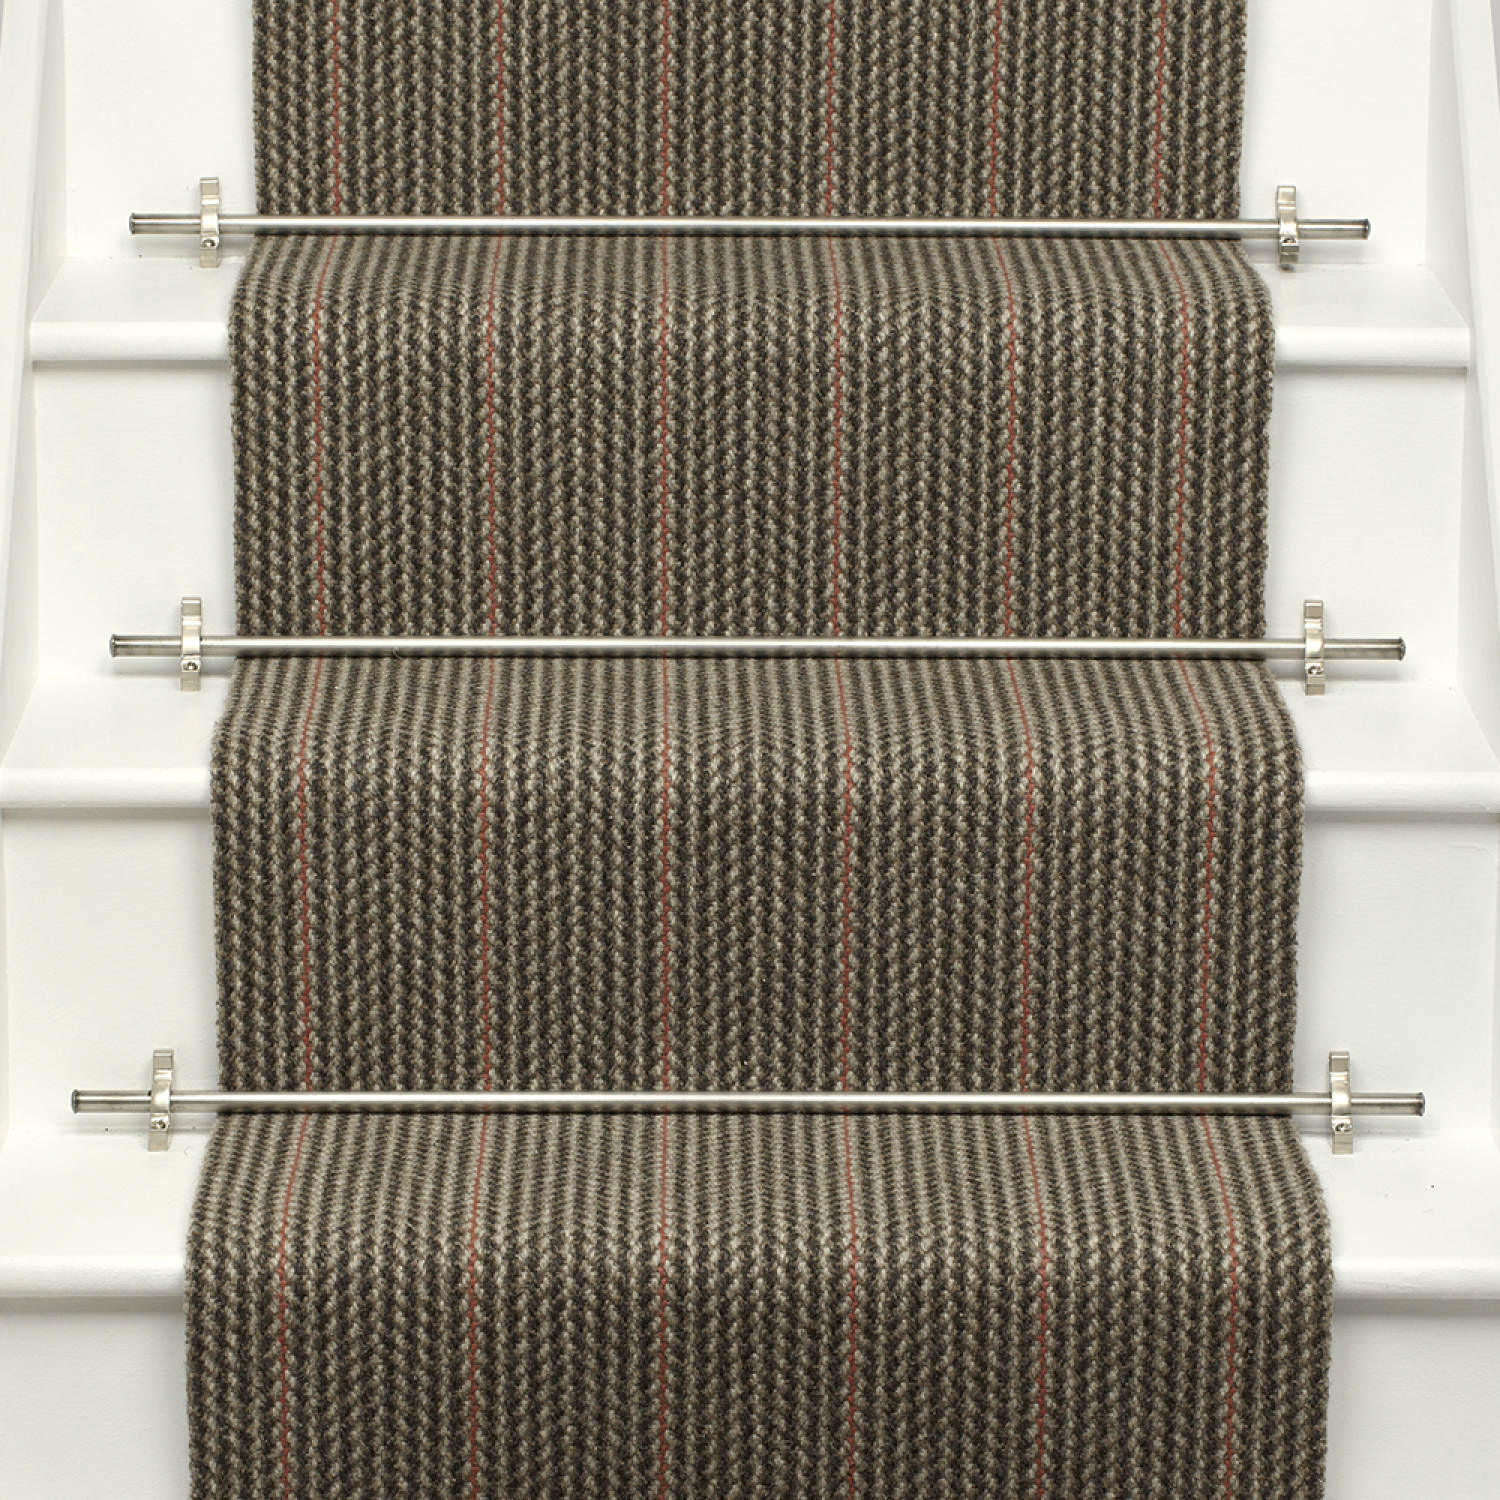 Broadcloth Russet stair runner by Roger Oates